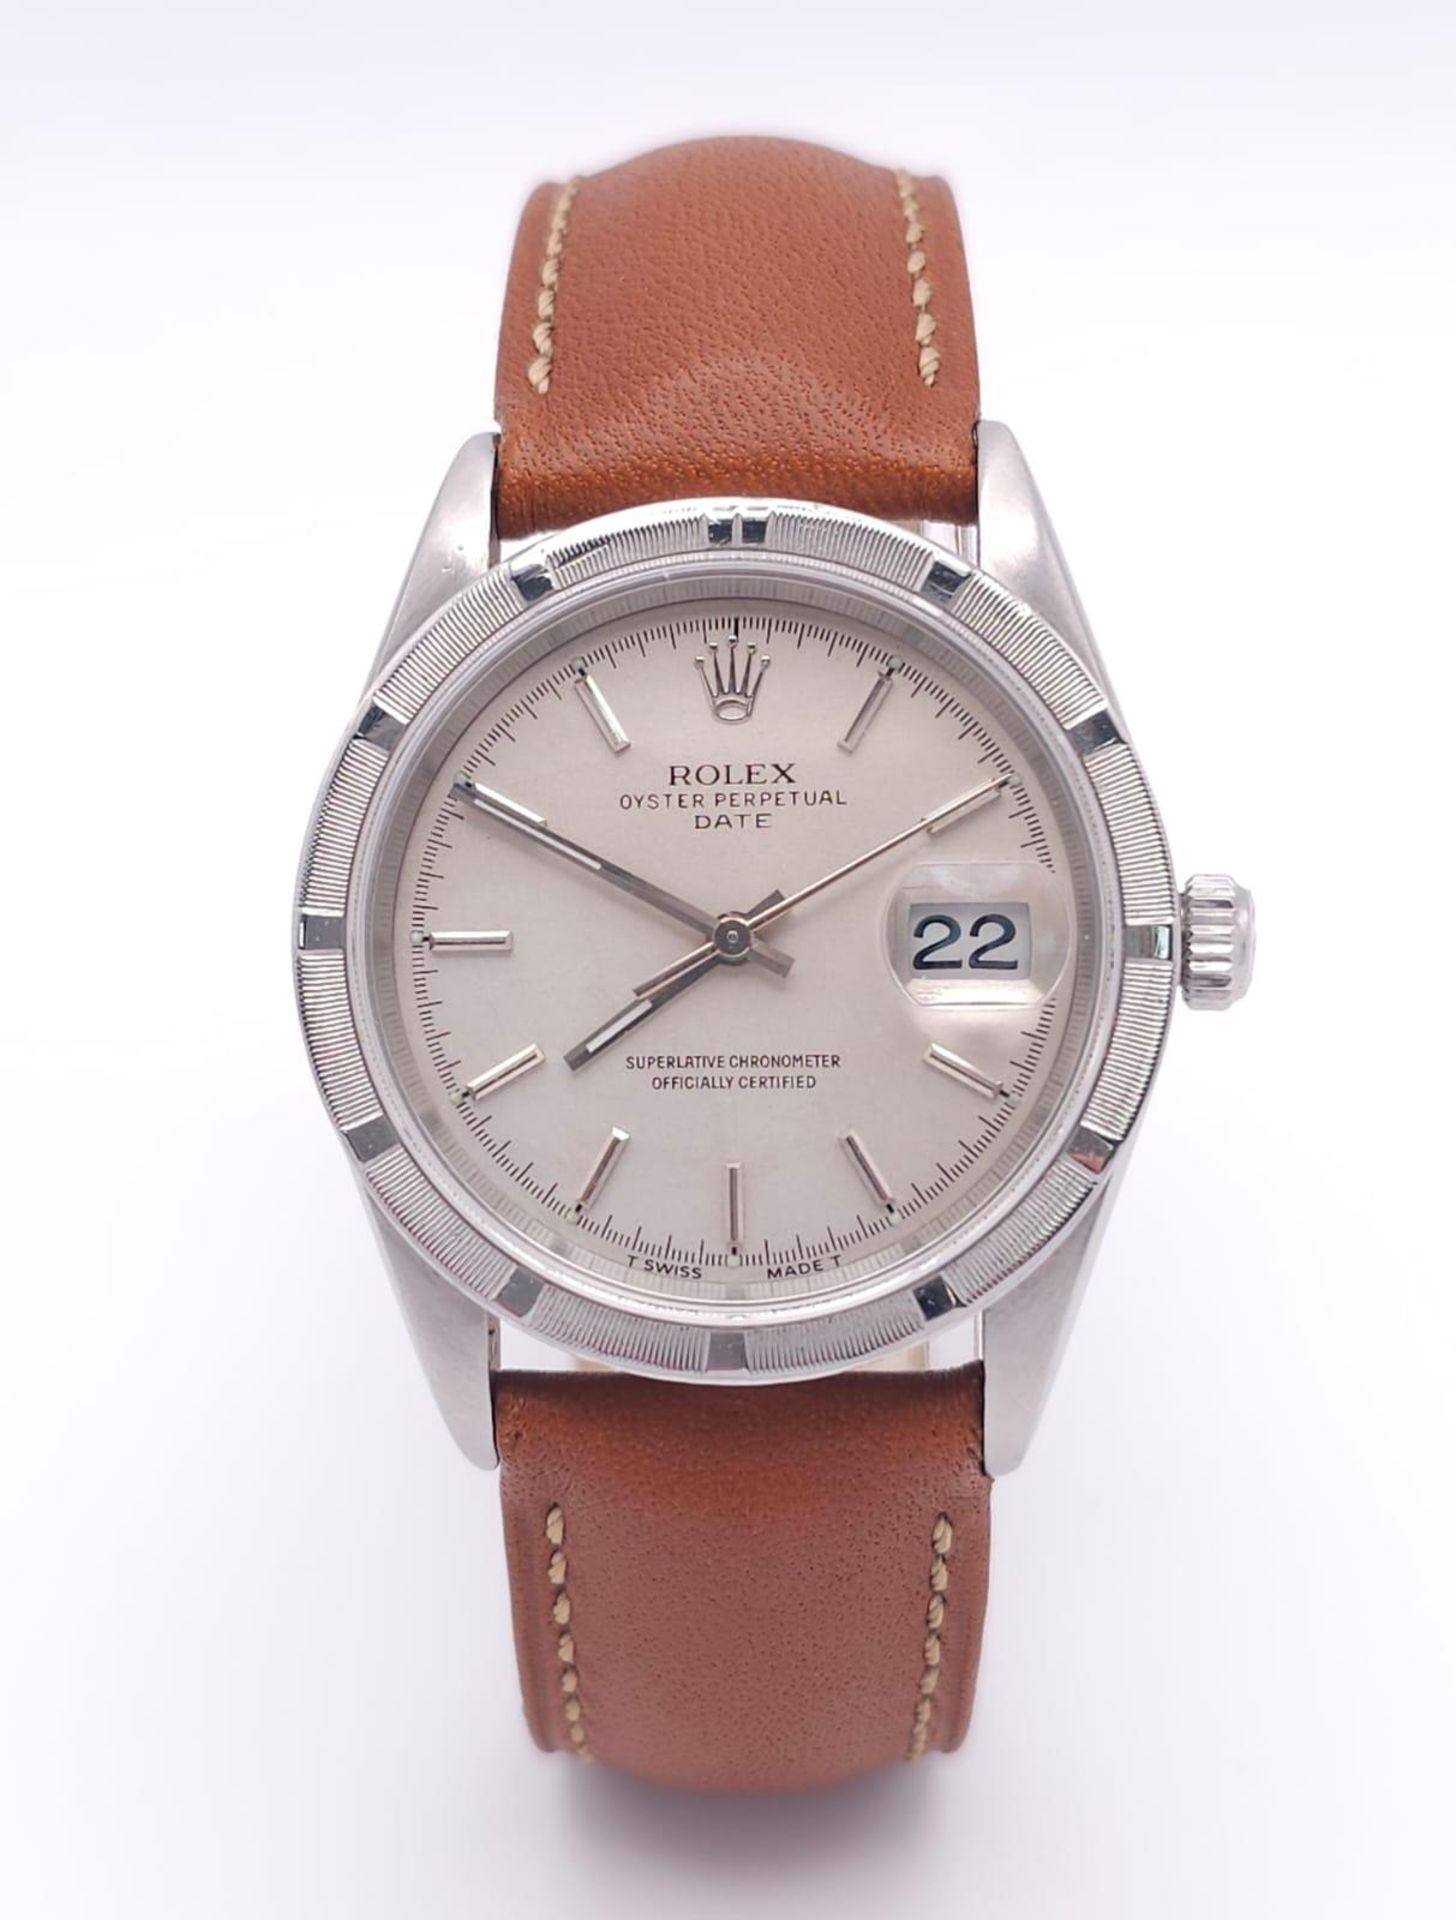 A Rolex Oyster Perpetual Date Automatic Gents Watch. Brown leather strap. Stainless steel case - - Image 2 of 9